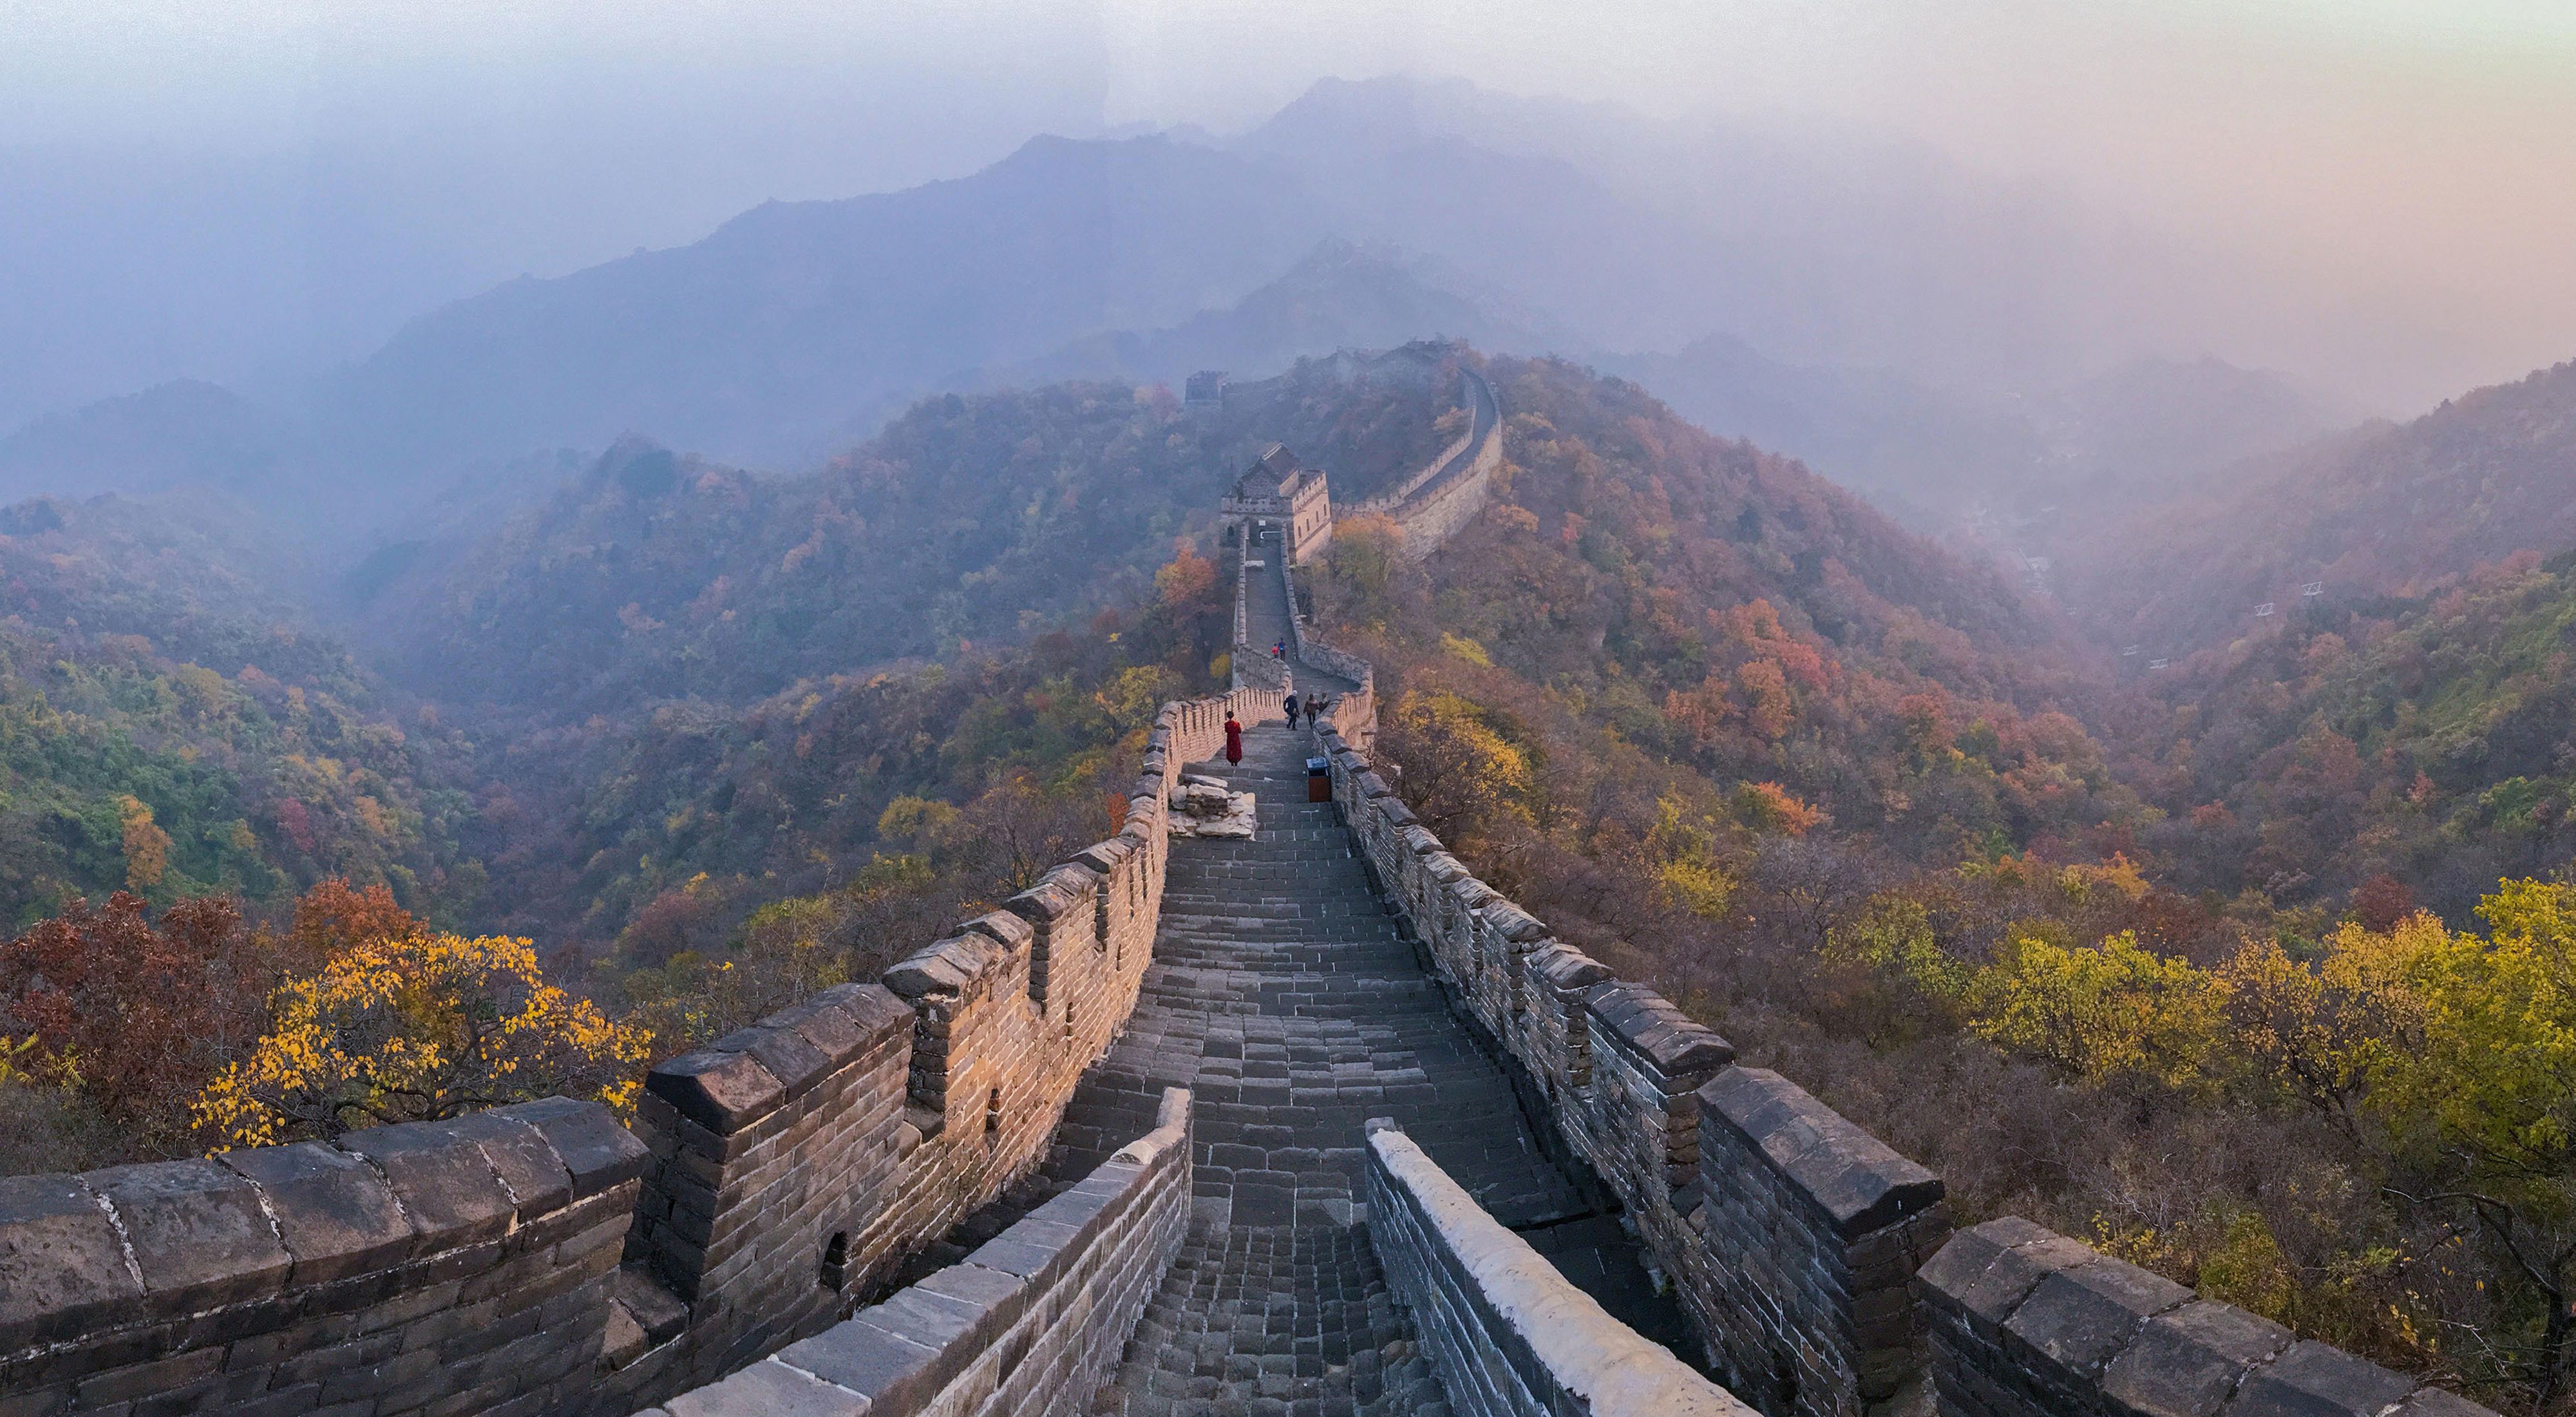 A view down the long pathway of the Great Wall of China shrouded in mist, with dense forest on either side of the wall.